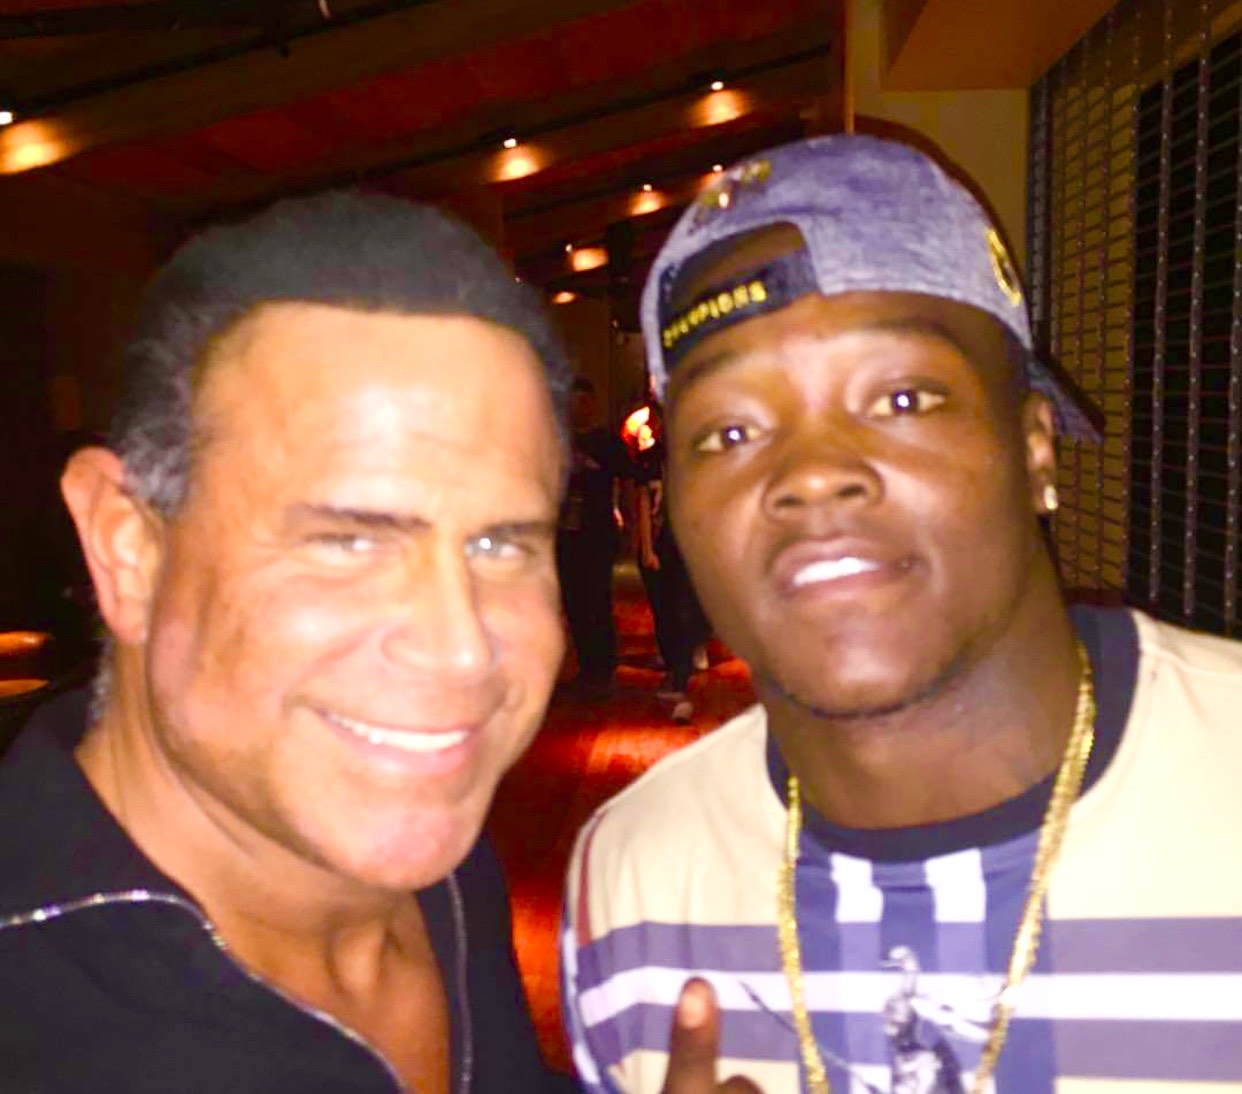 Danny Trevathan, Danny Trevathan NFL, Danny Trevathan Broncos, Danny Trevathan Bears, Keith Middlebrook, Chicago Bears Danny Trevathan, NFL Danny Trevathan, Keith Middlebrook, Keith Middlebrook Super Entrepreneur Icon, keith Middlebrook Real Iron Man, Keith Middlebrook Bodybuilder, Keith Middlebrook Bodybuilding, Keith Middlebrook Middlebrook Foundation, Charity for Kids, YouTube.com Keith Middlebrook, Keith Middlebrook Twitter @1KMiddlebrook, Keith Middlebrook Instagram @KeithMiddlebrook1, Success Wealth Prosperity, Keith Middlebrook Marvel, Natural Organic, Keith Middlebrook Nutrition, Keith Middlebrook Gym talk, Keith Middlebrook Ballers, IMDB.com Keith Middlebrook, Keith Middlebrook Muscle, God, Goals, Gym, Gratitude, Giving, Keith Middlebrook Real Estate, Keith Middlebrook Xccelerated Success, Keith Middlebrook Training, Training, Natural, Organic, Keith Middlebrook Fans, Keith Middlebrook Followers, Keith Middlebrook Net Worth 2020, Keith Middlebrook Billionaire, Keith Middlebrook Success, Keith Middlebrook Winning, Keith Middlebrook WON, Keith Middlebrook Training, NFL, NBA, MLB, Boxing, Racing, NASCAR, NFL Keith Middlebrook, Keith Middlebrook NFL, Football, Bears, Chicago Bears, Broncos, Denver Broncos,